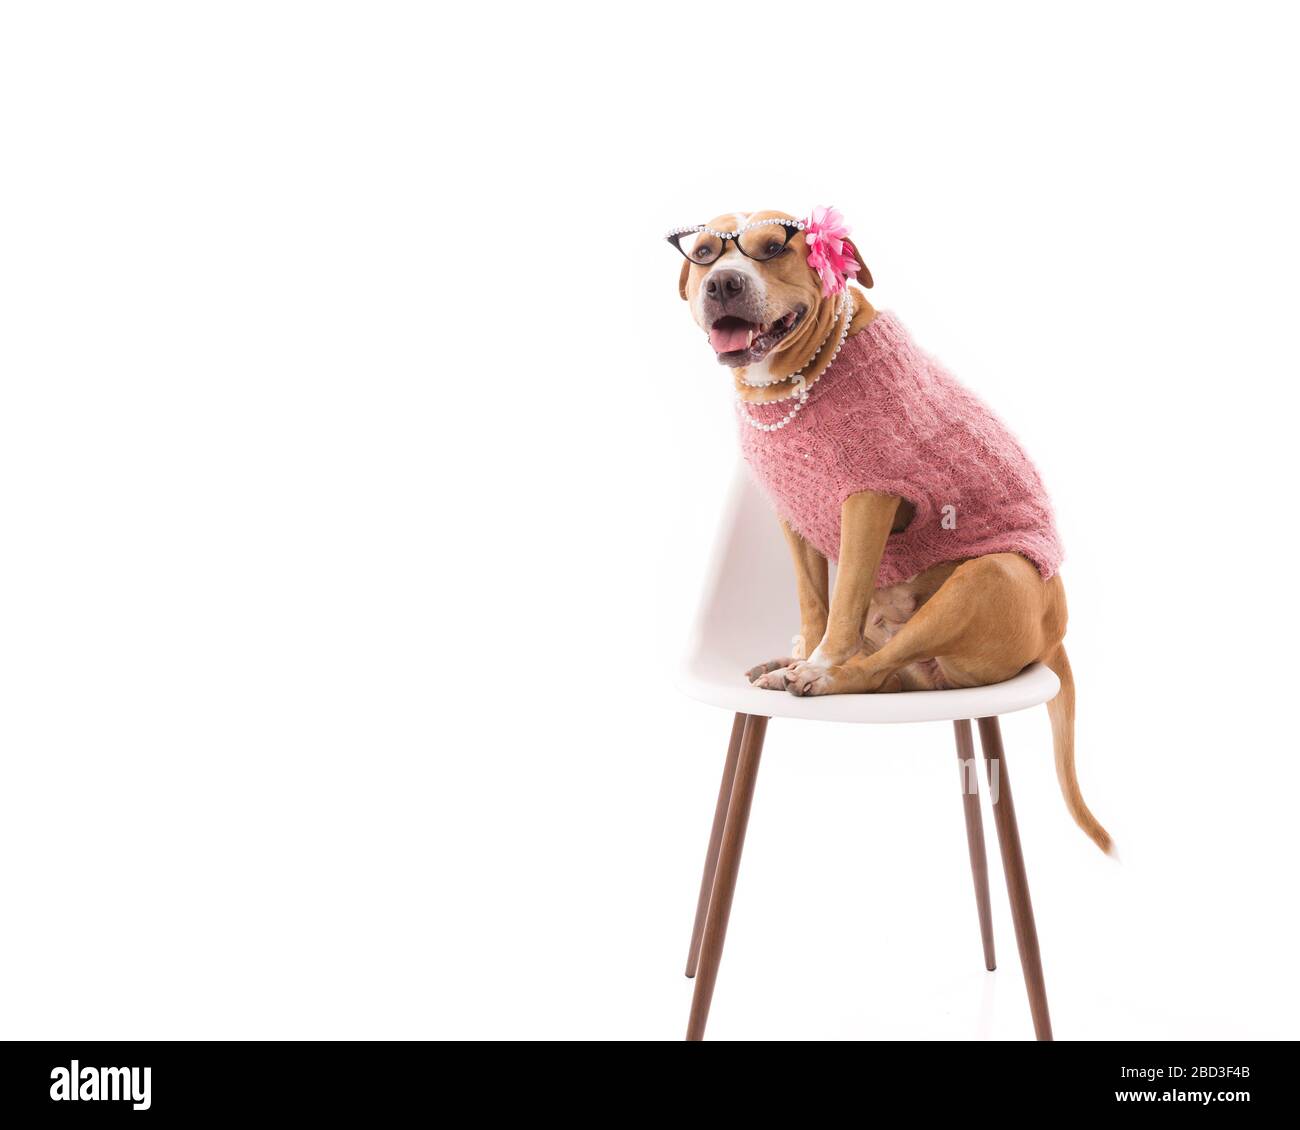 Red and white pit bull in feminine clothing sitting on chair high key Stock Photo